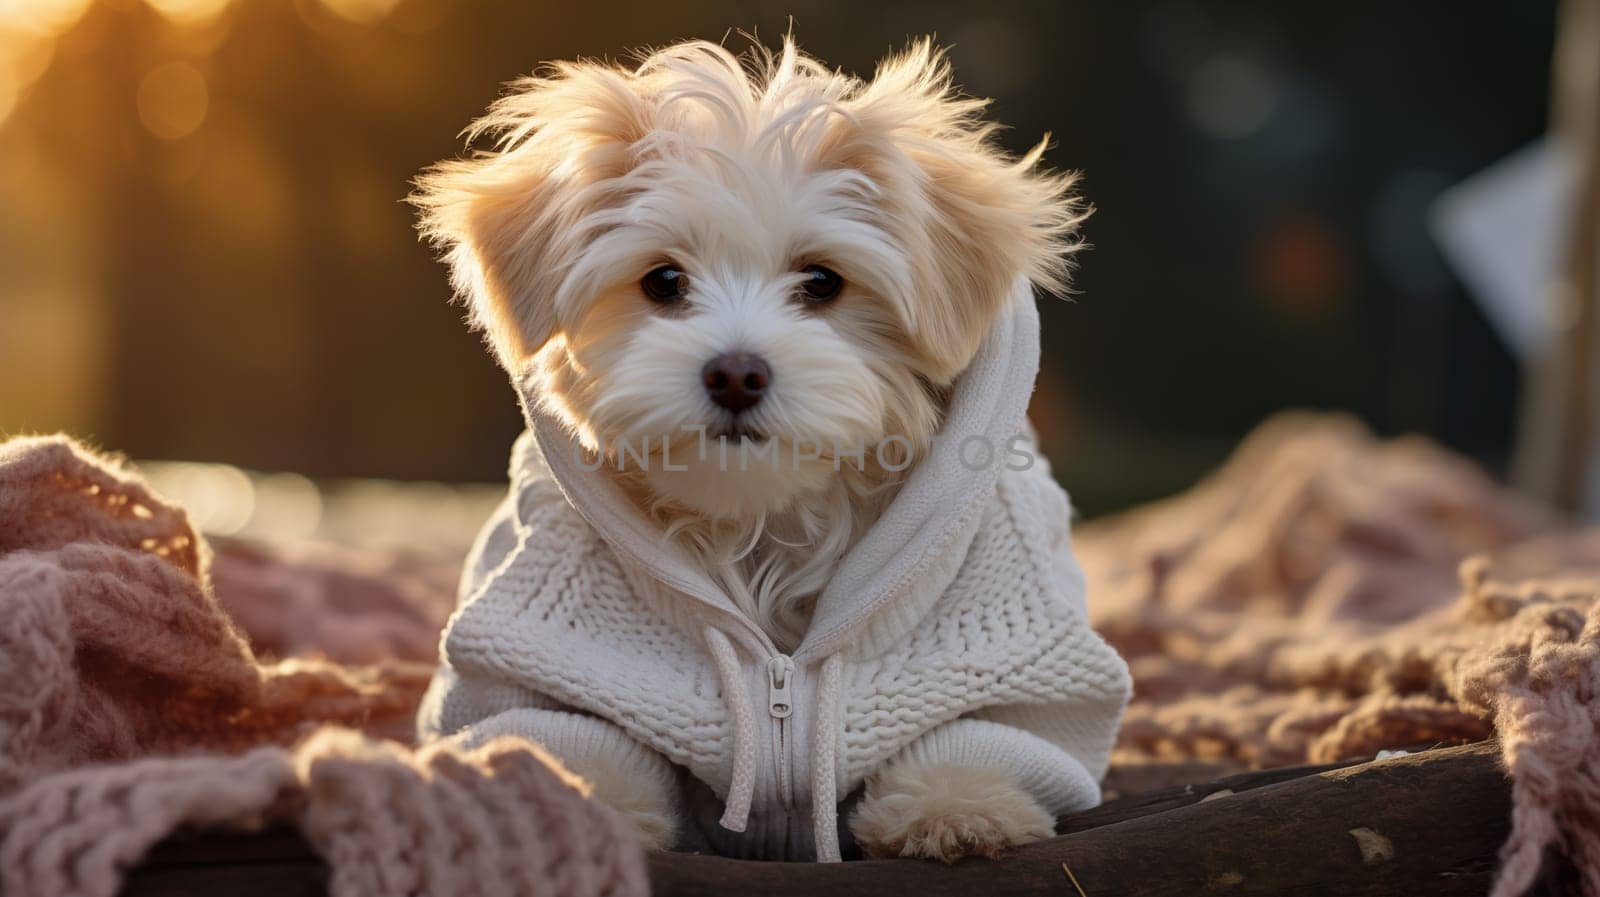 Cute white terrier puppy in white sweater lying on a knitted blanket, outdoor.